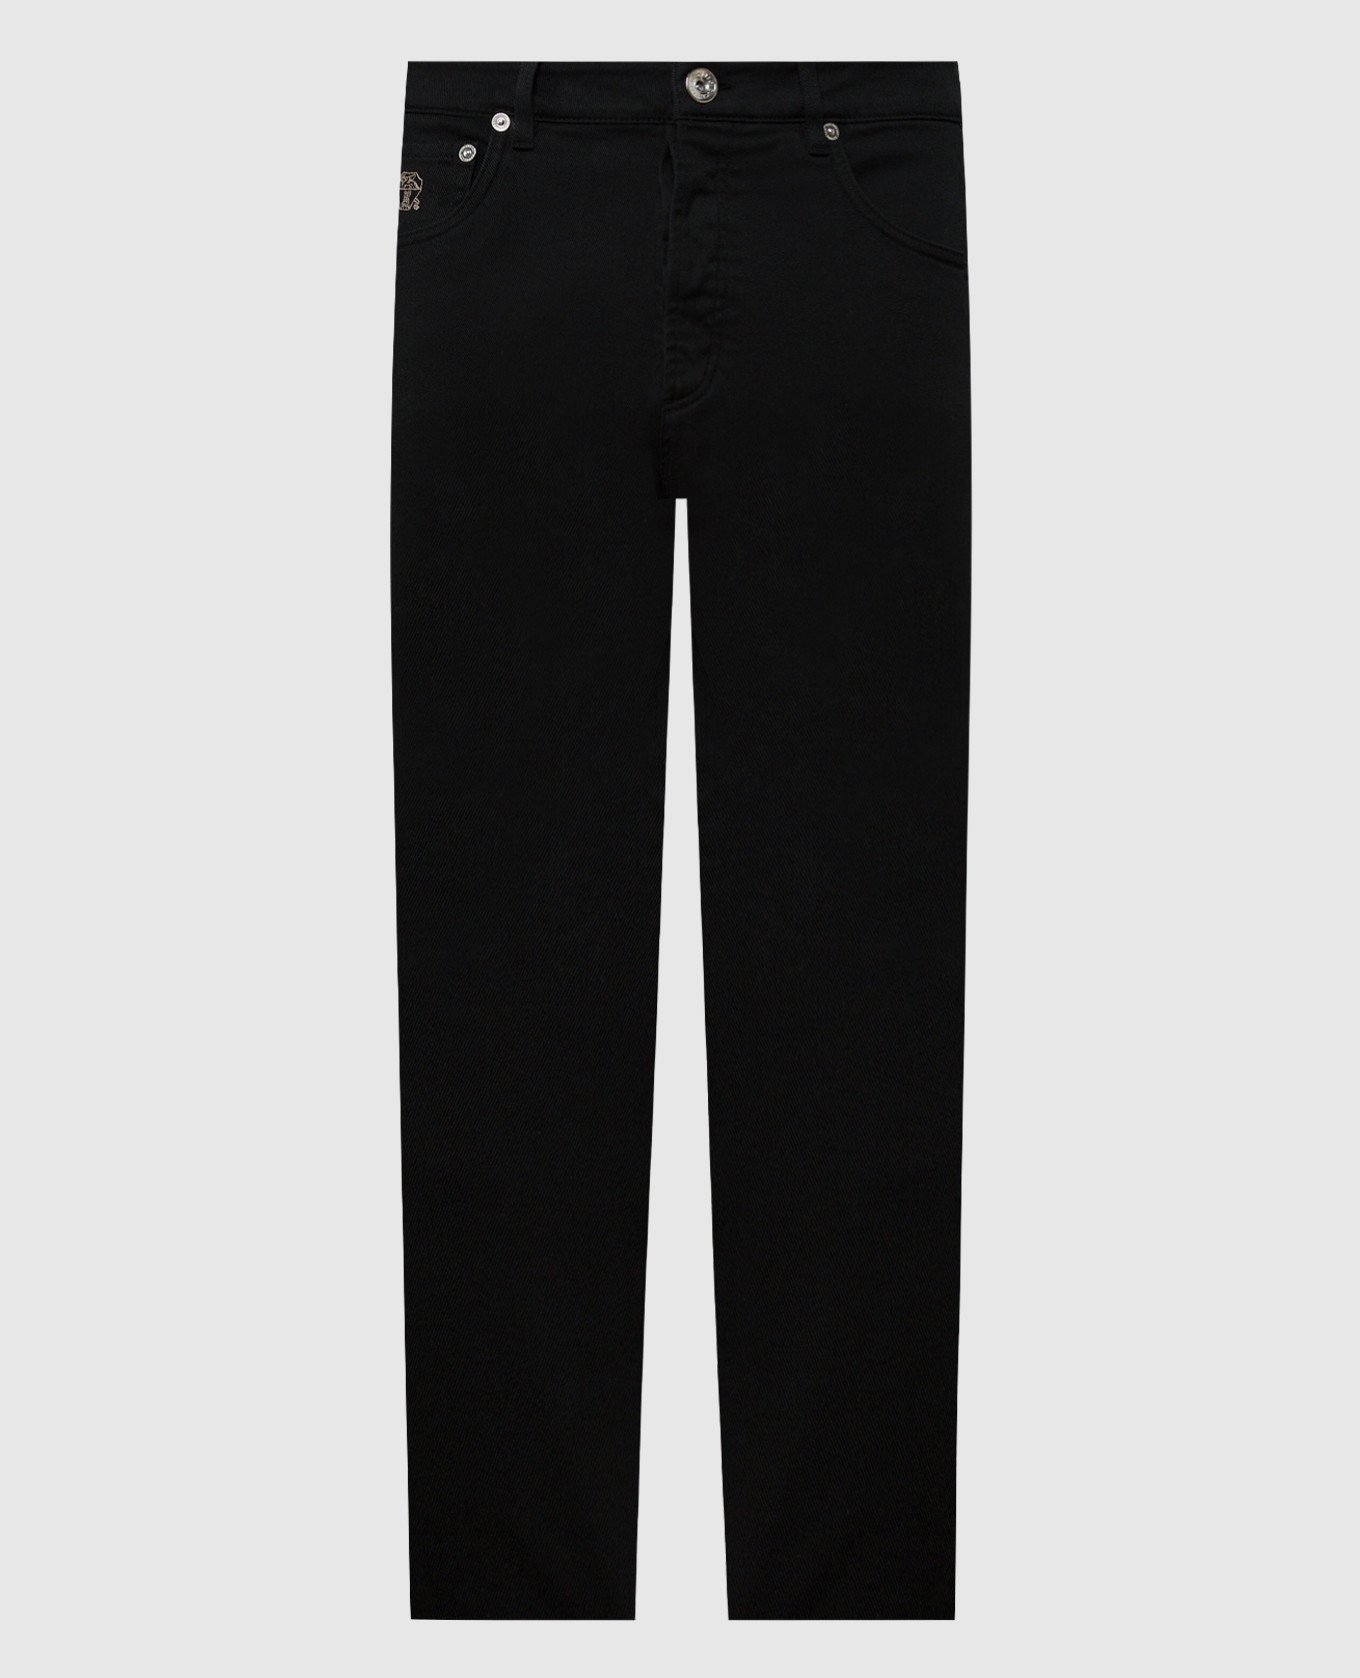 Black tapered pants with logo patch